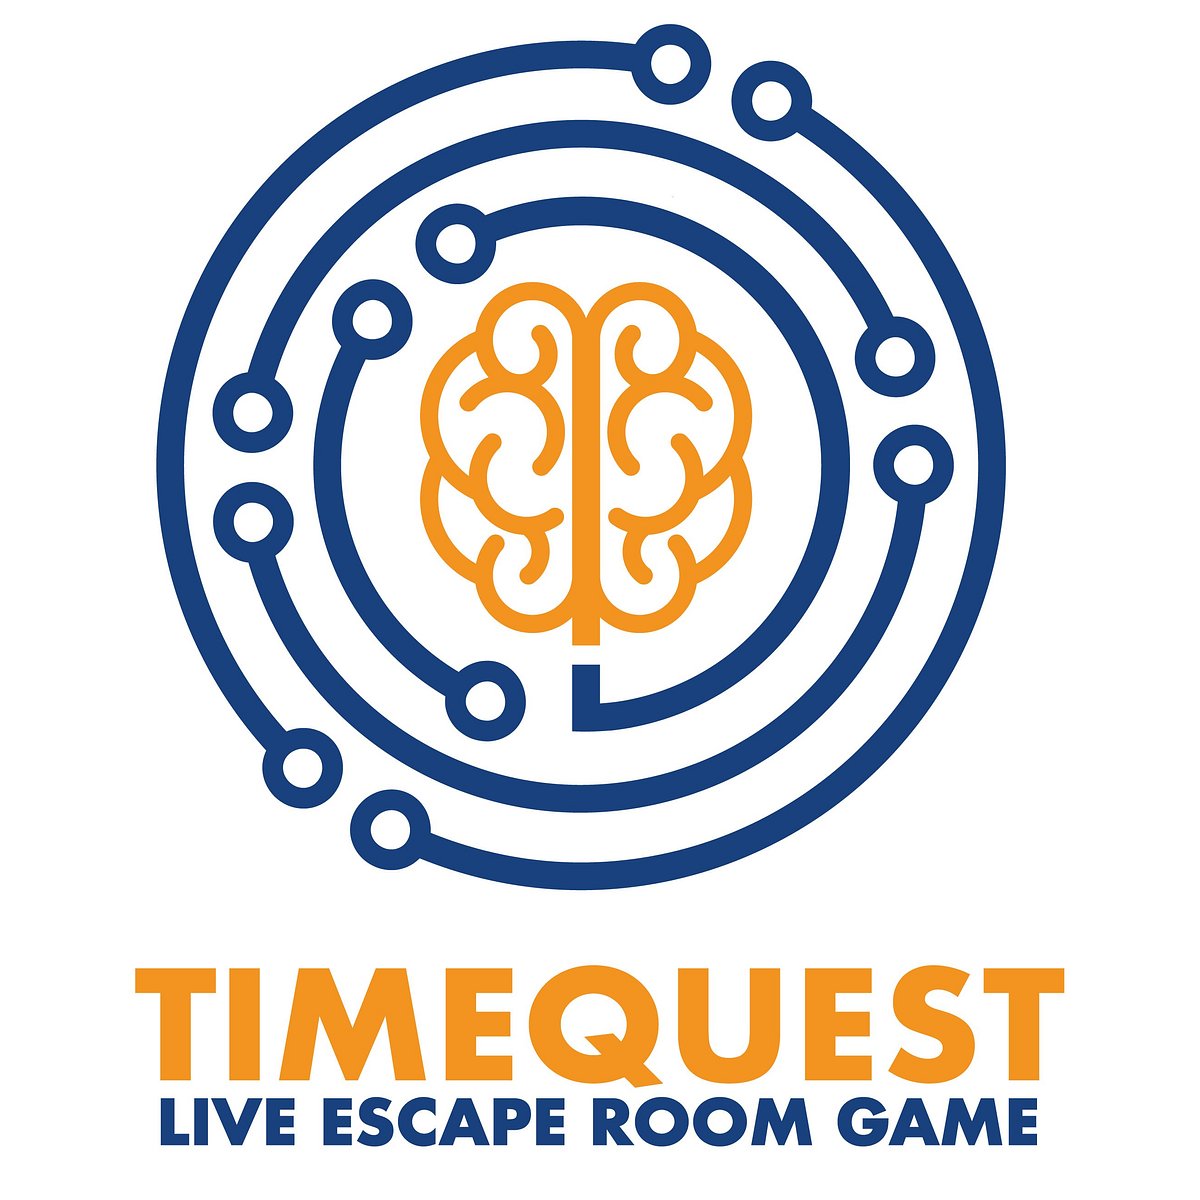 Youth utilize life skills during Escape Room challenge - Methodist